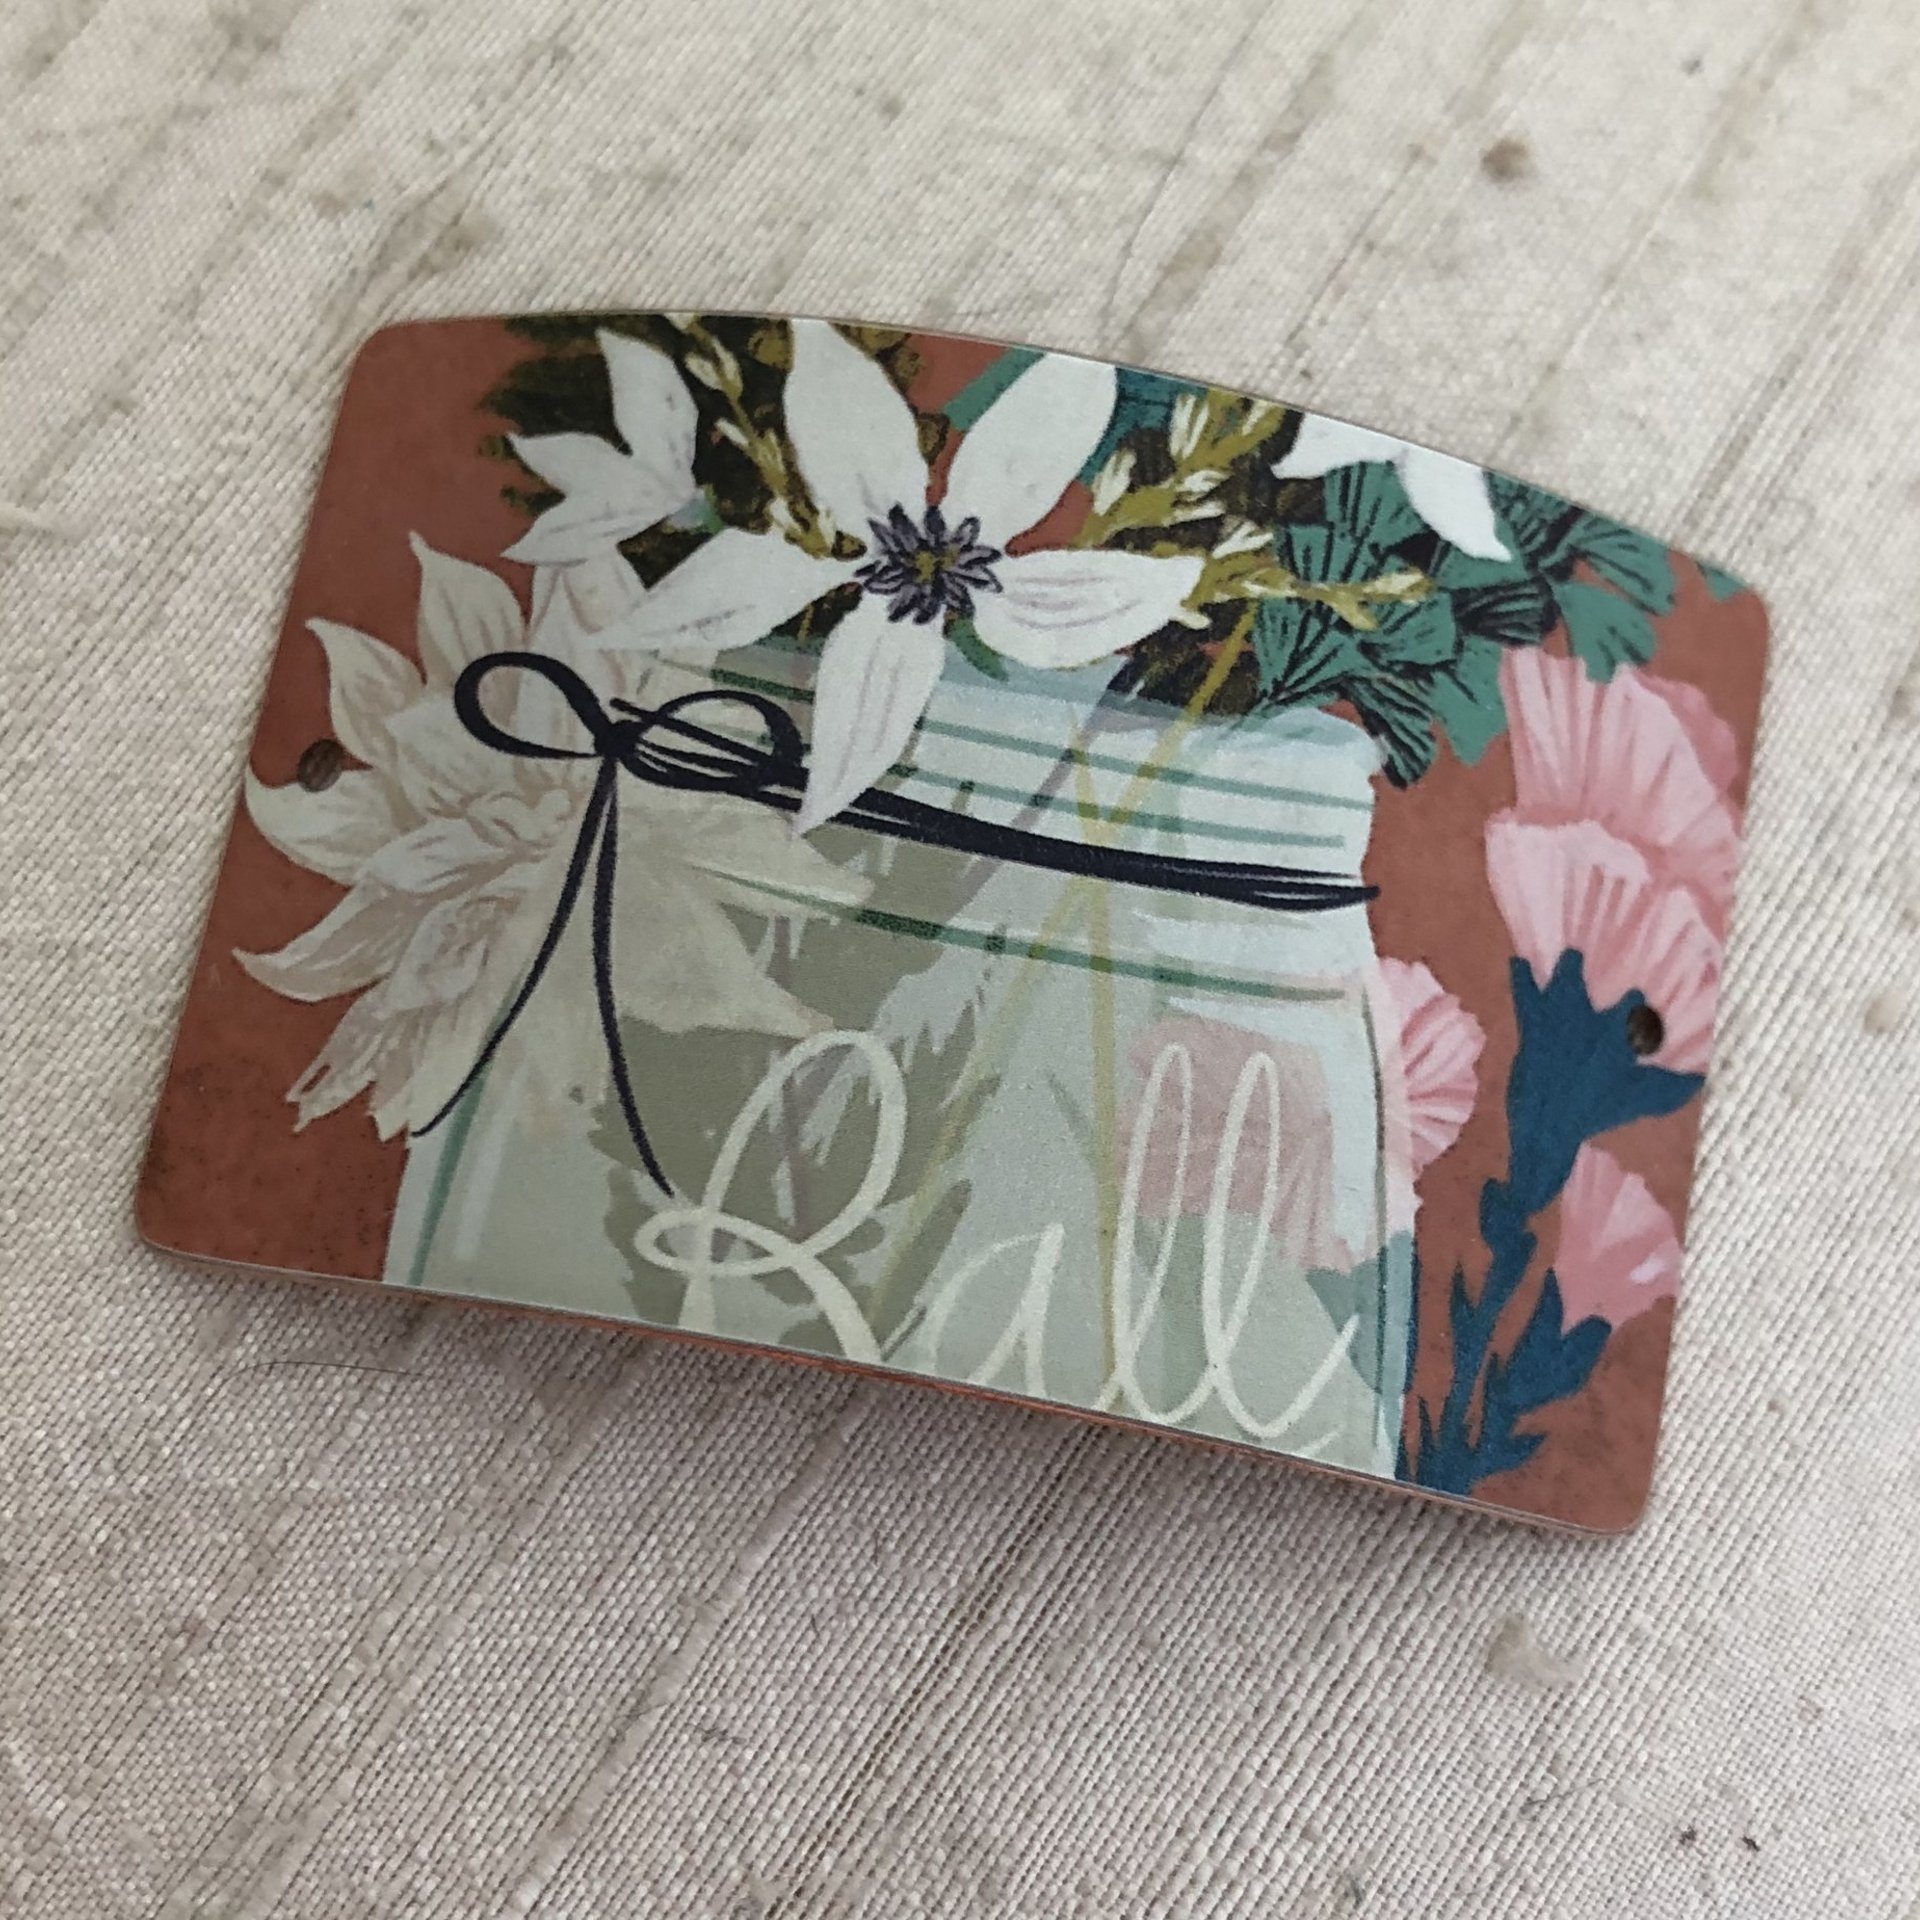 Faux Tin Workshop: The Fine Art of Image Transfers on Copper